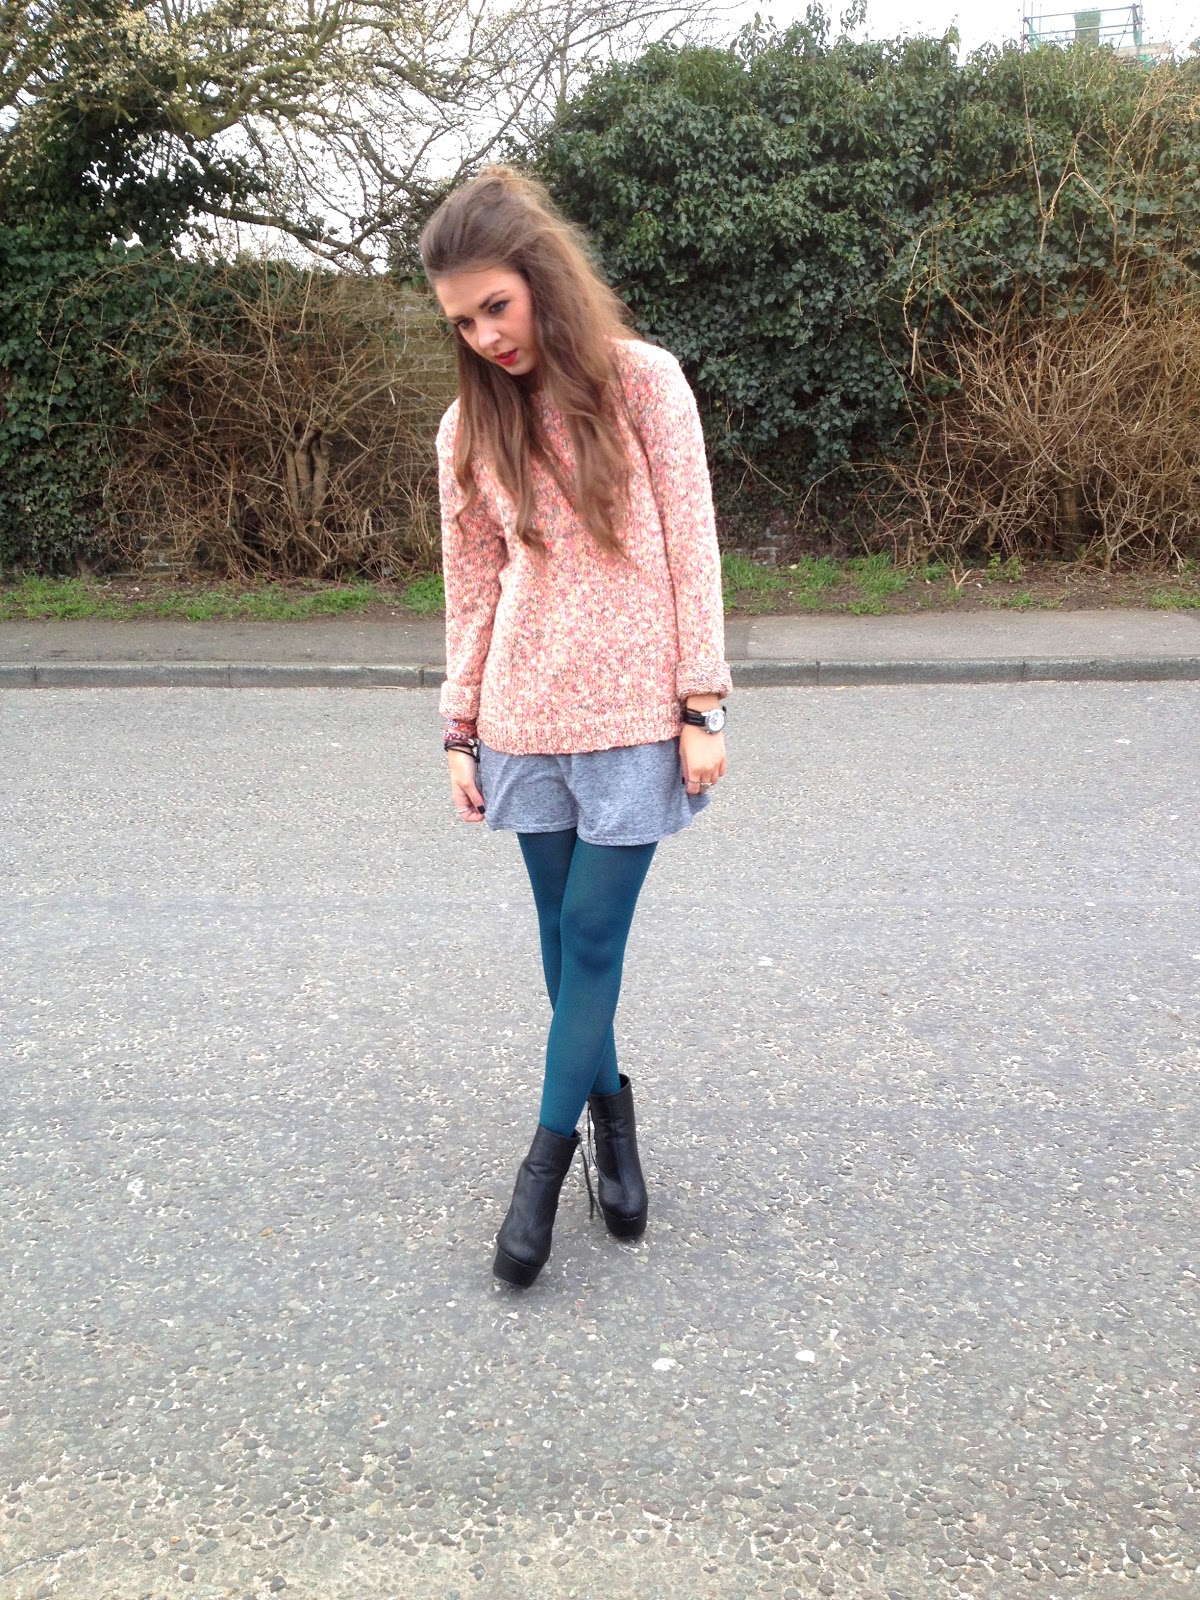 SC: Oversized jumper styled with turquoise tights